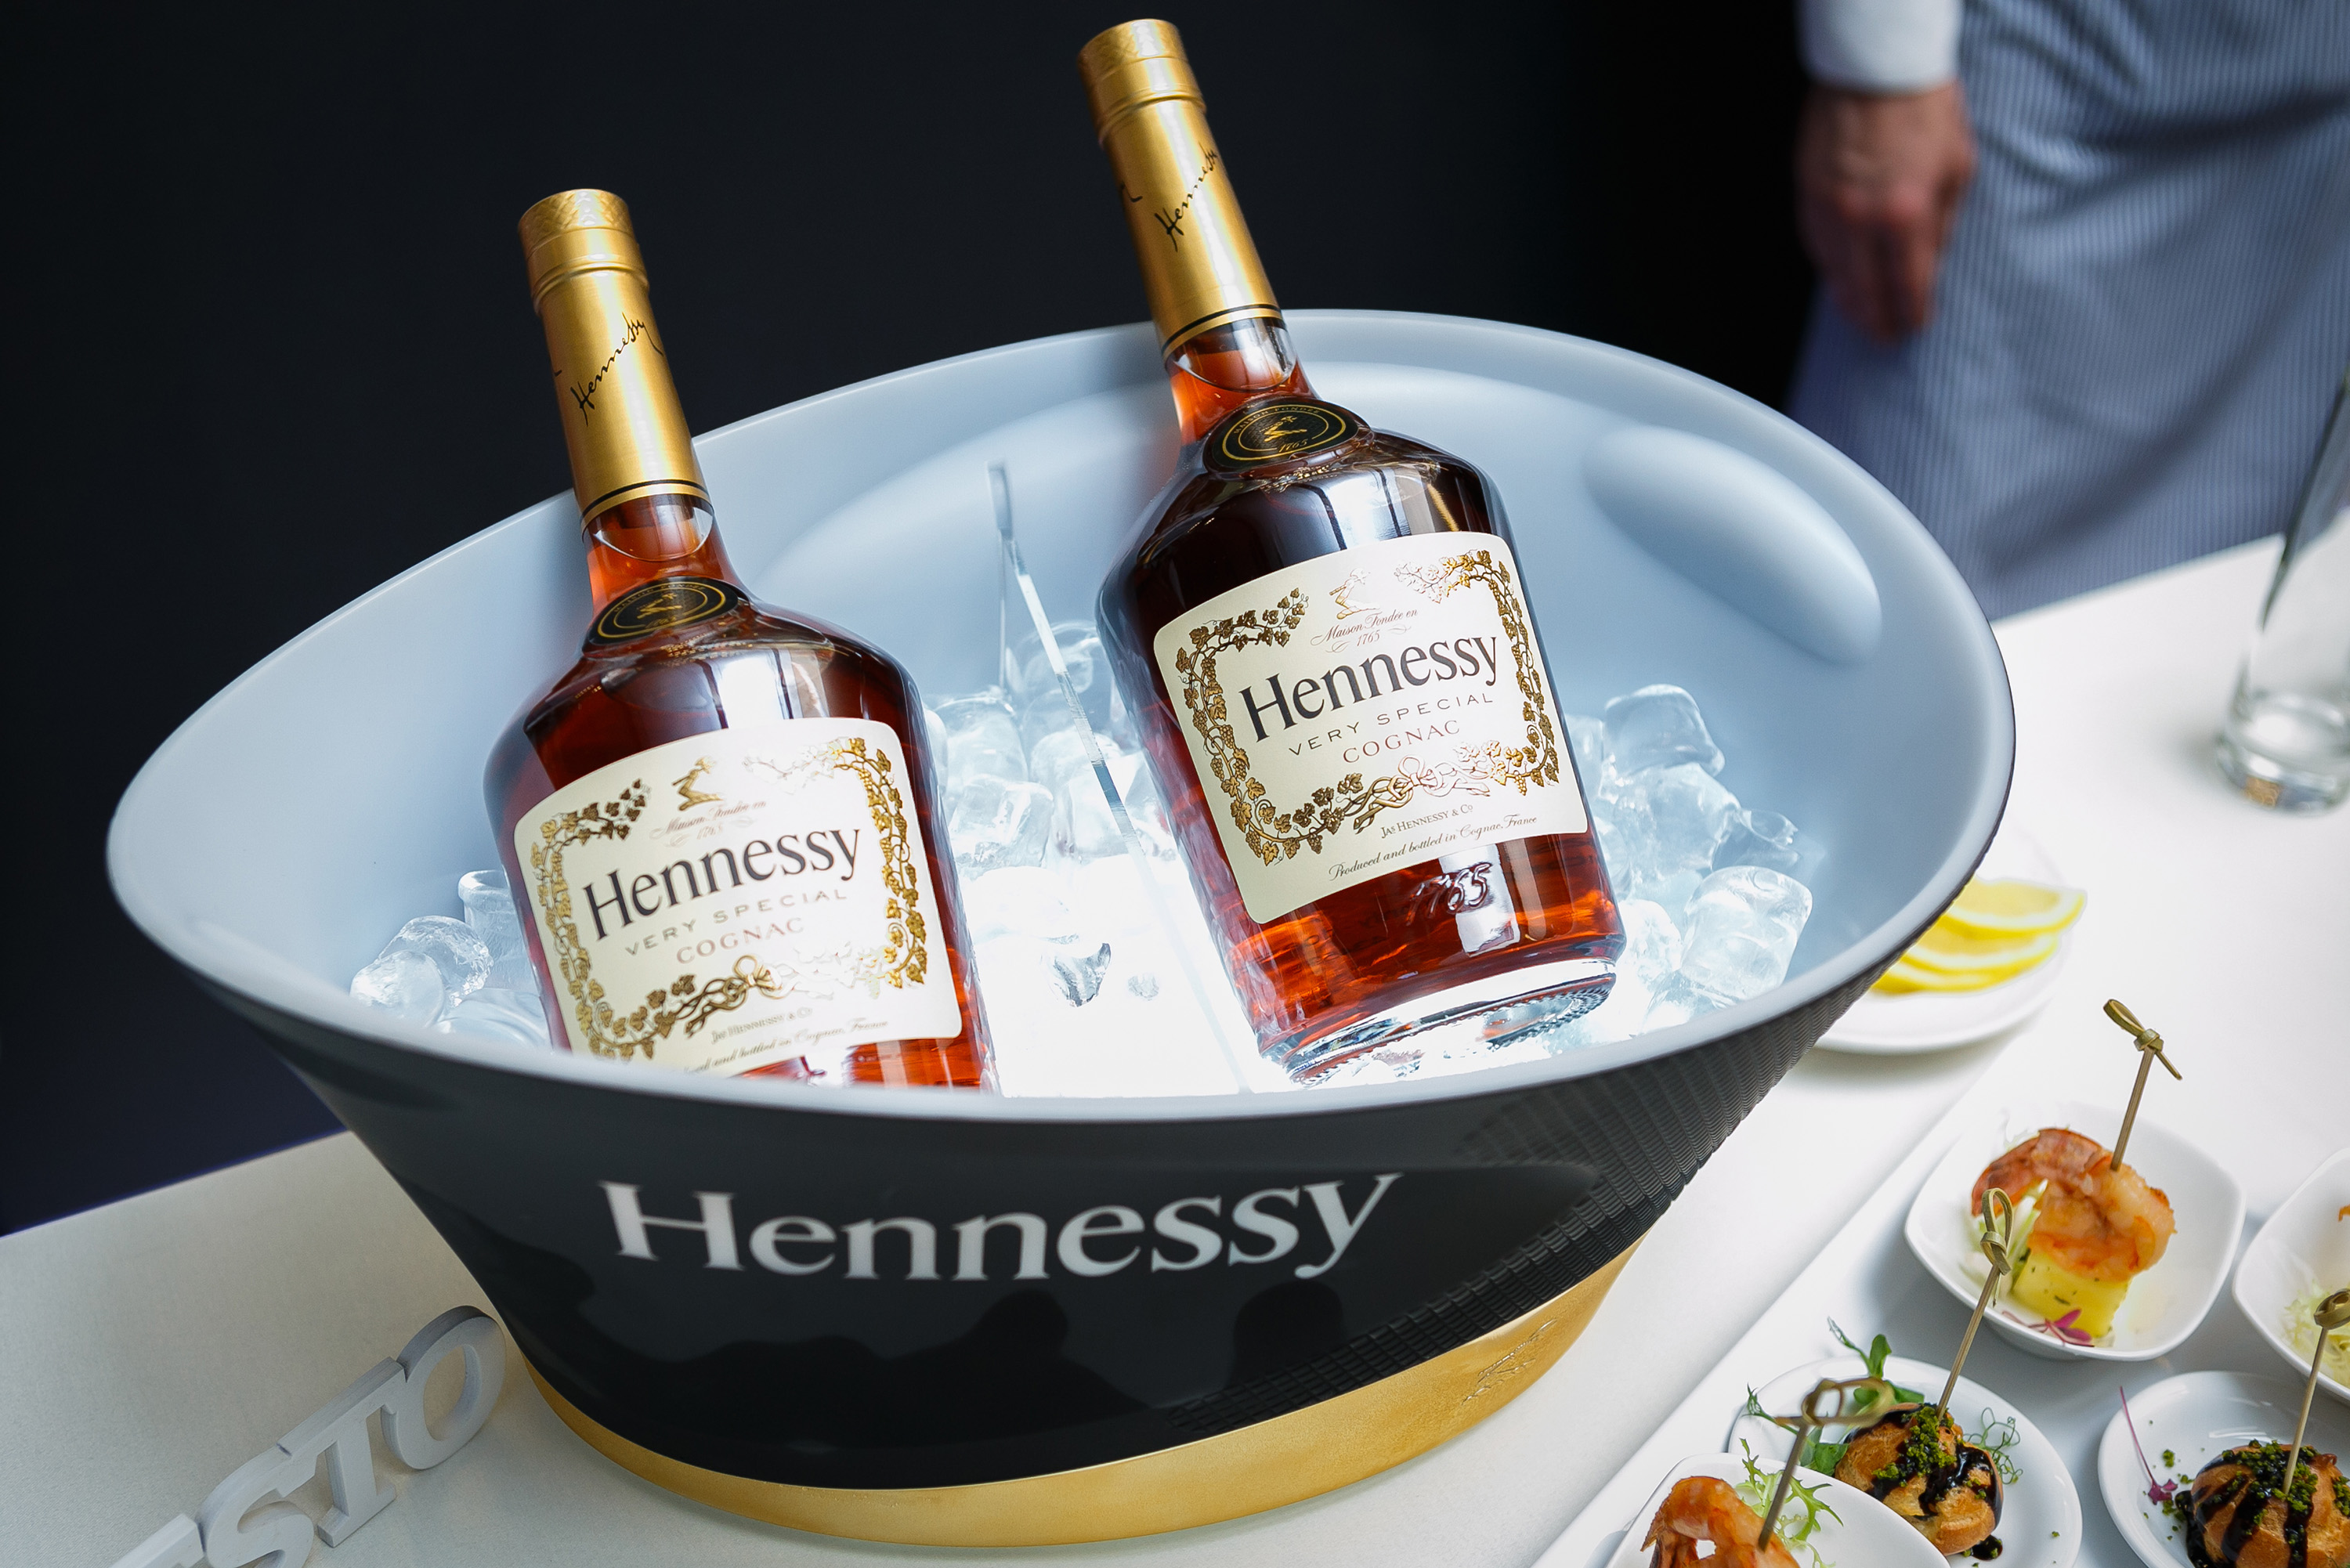 Hennessy Local Spirit From Cognac France